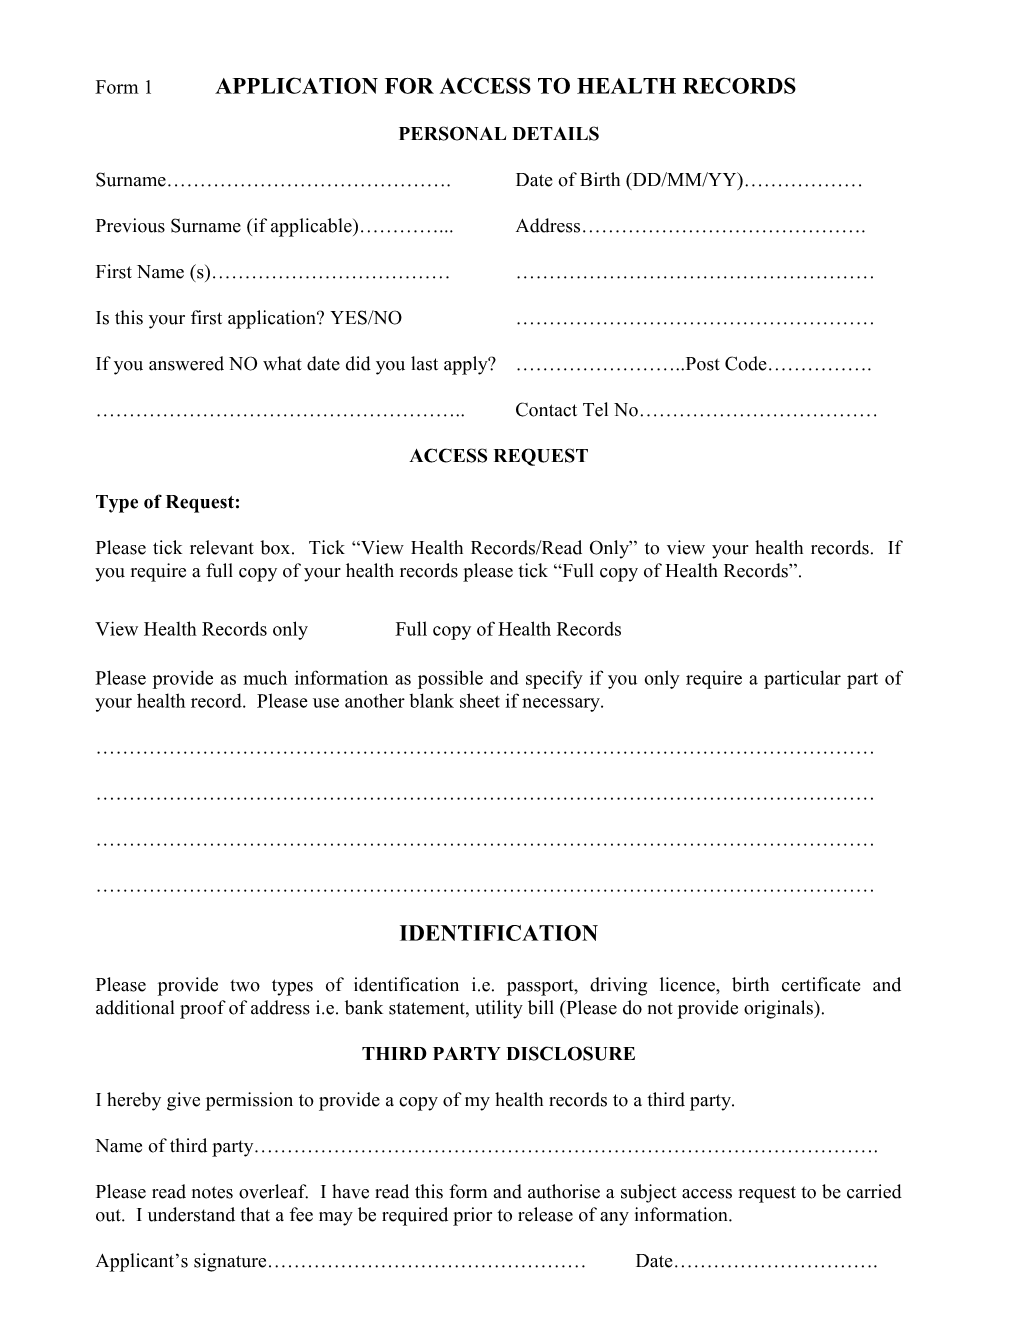 Form 1 APPLICATION for ACCESS to HEALTH RECORDS